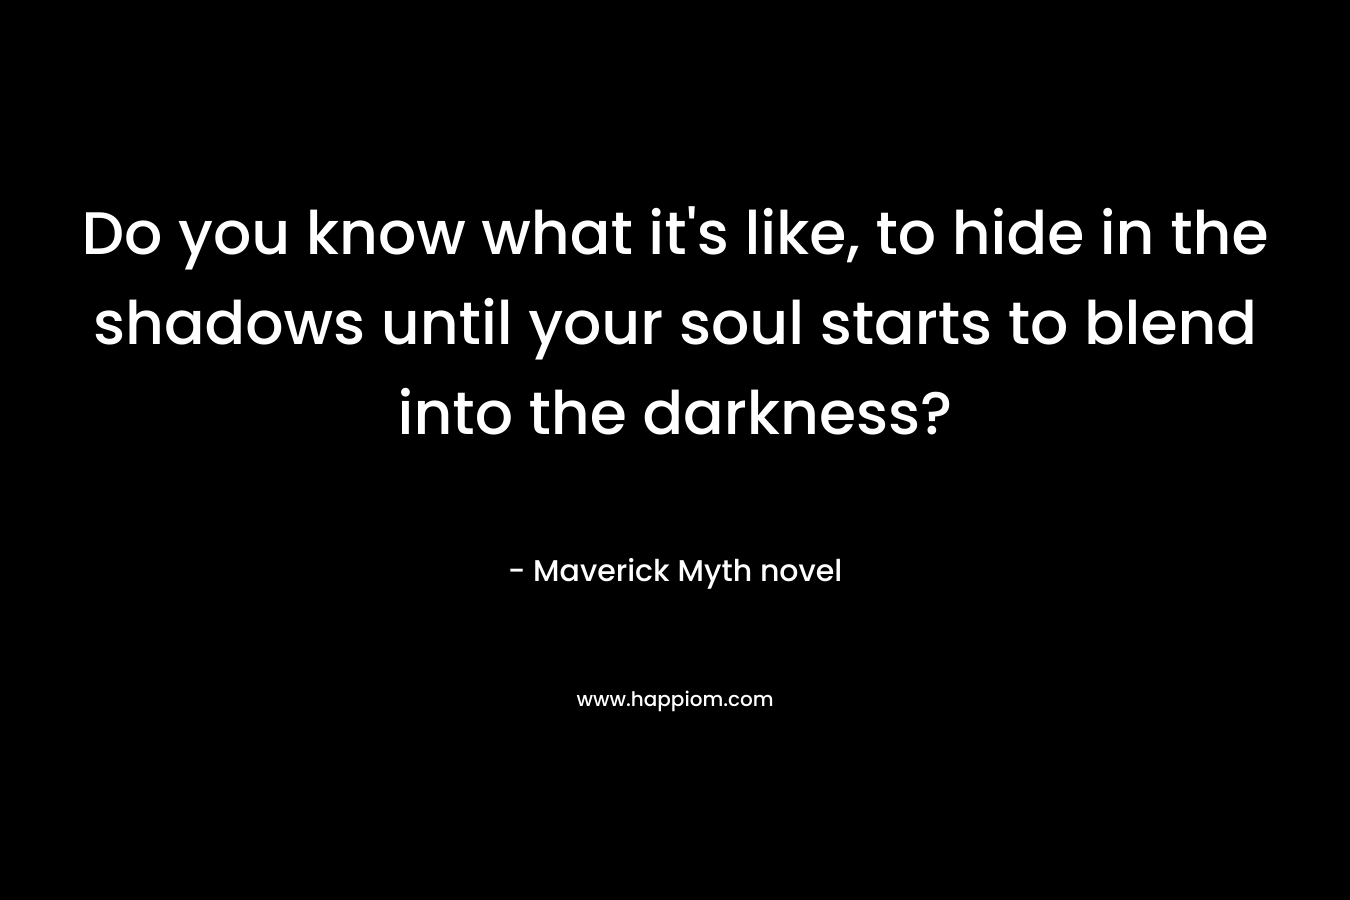 Do you know what it’s like, to hide in the shadows until your soul starts to blend into the darkness? – Maverick Myth novel